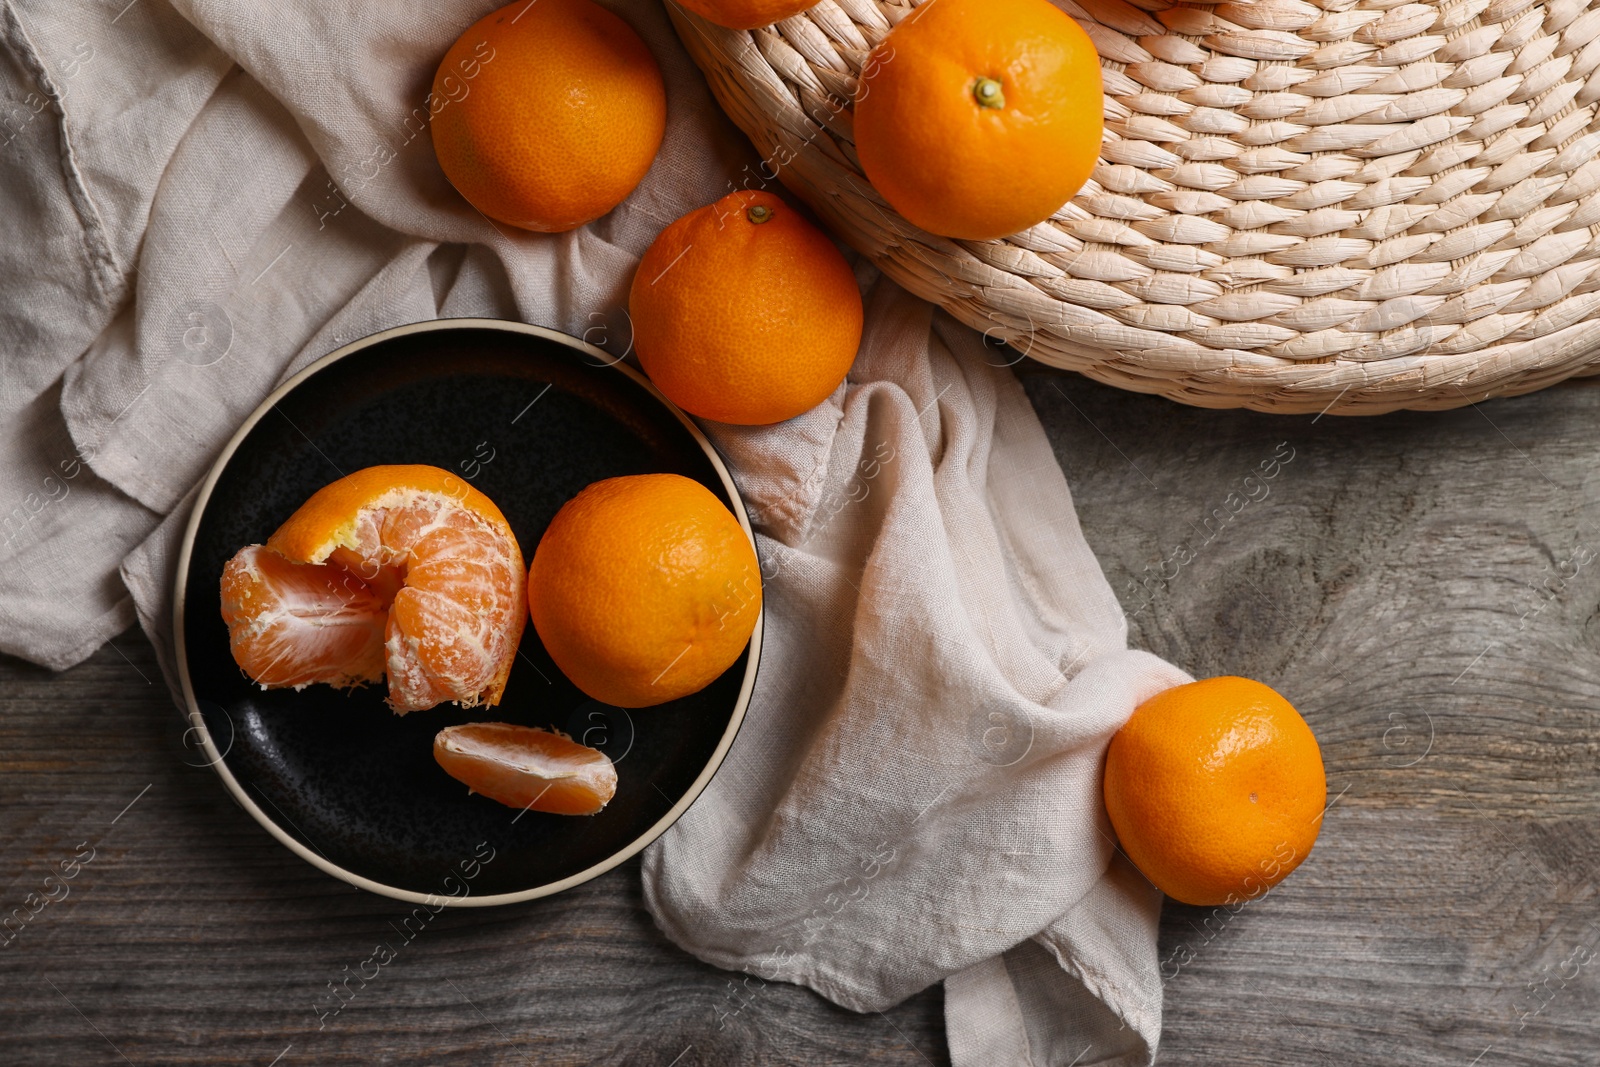 Photo of Many fresh ripe tangerines on wooden table, flat lay